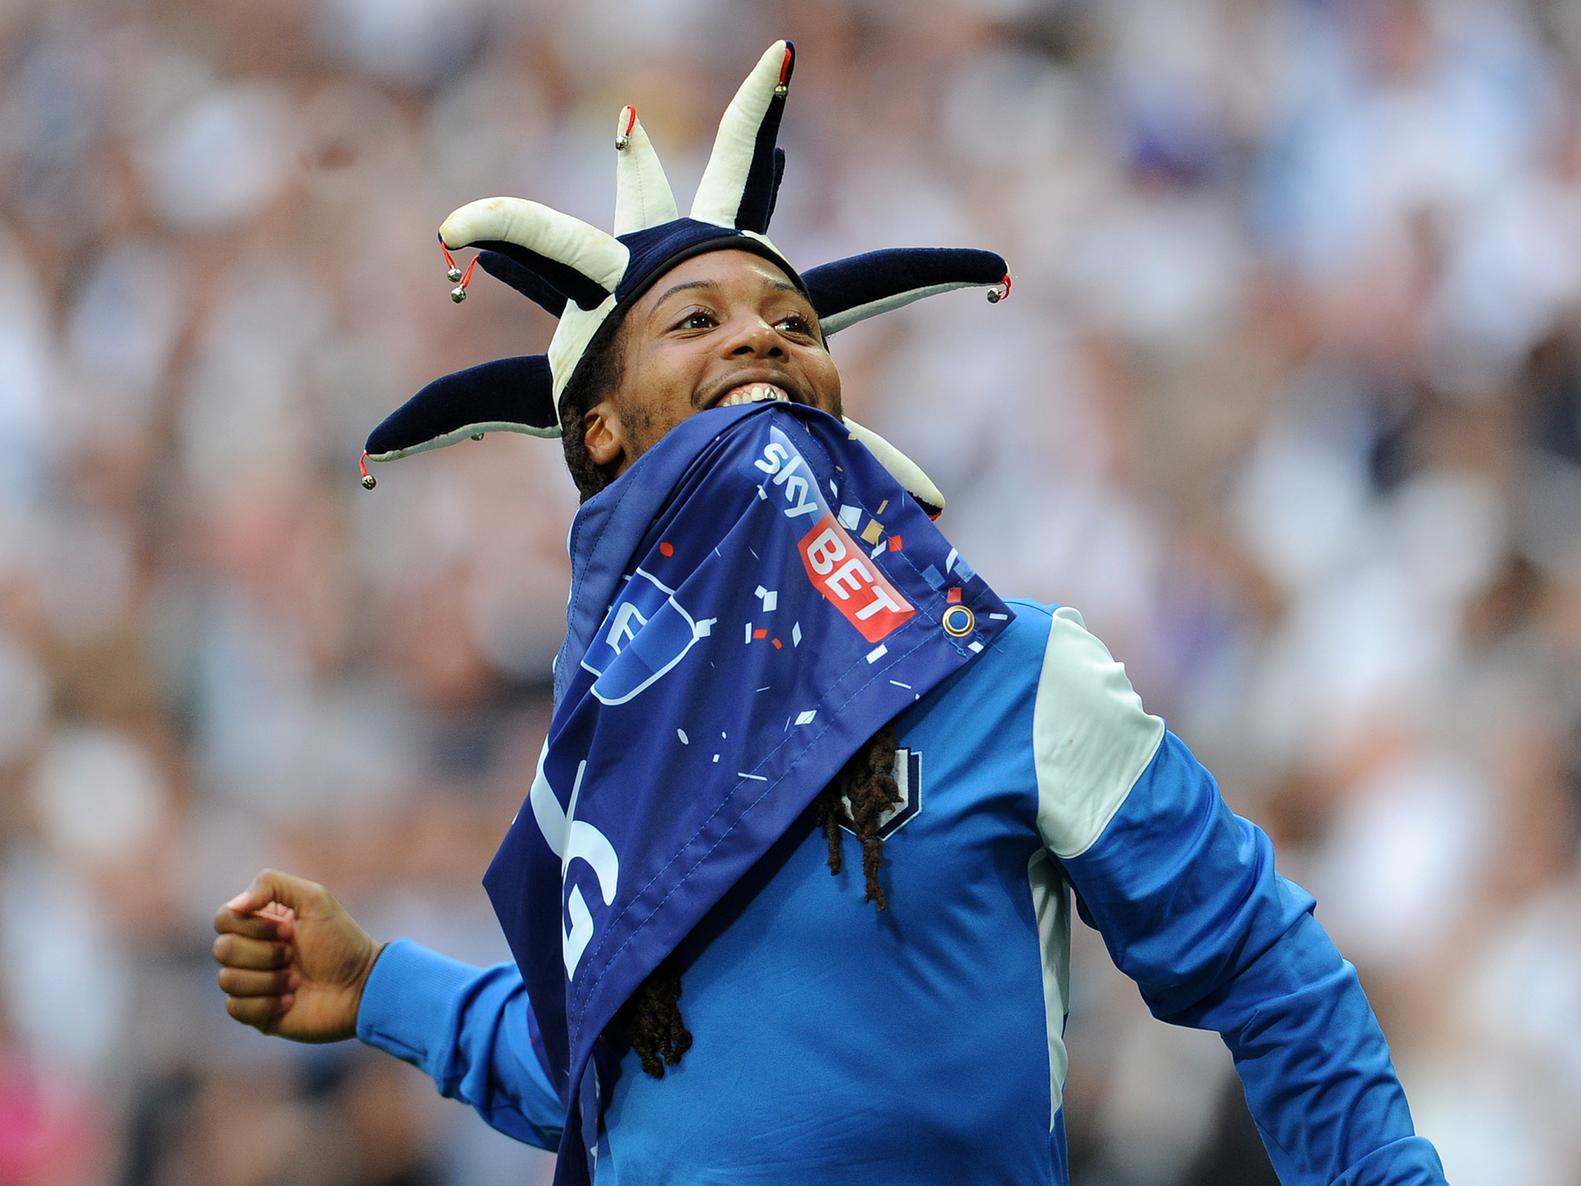 Daniel Johnson celebrates at Wembley after PNE's League One play-off final win over Swindon